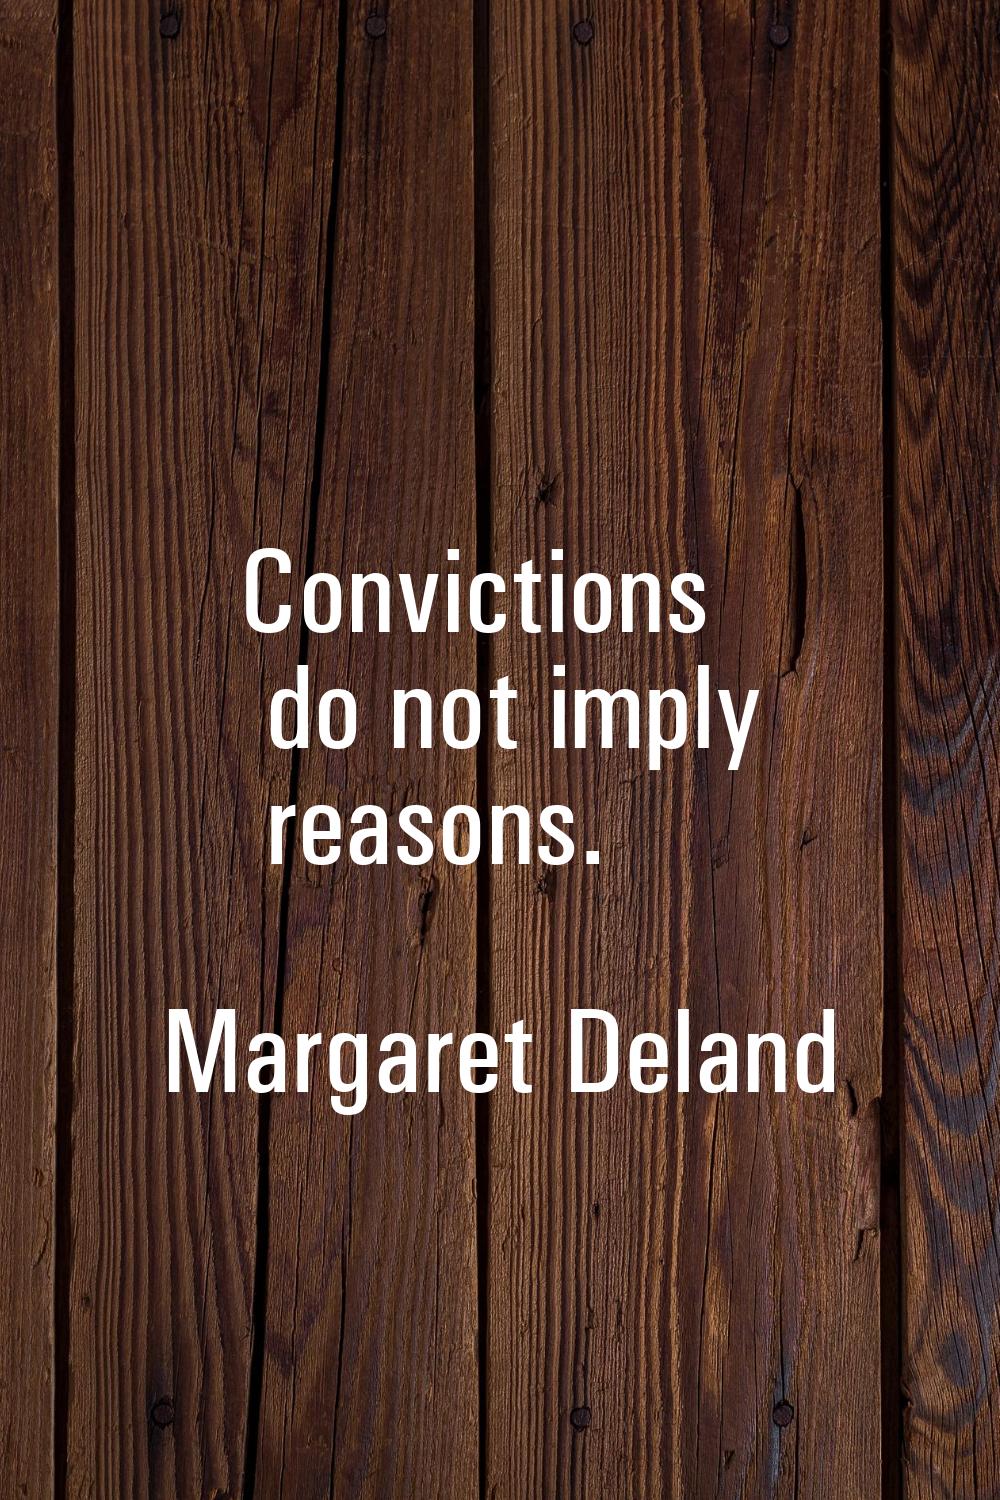 Convictions do not imply reasons.